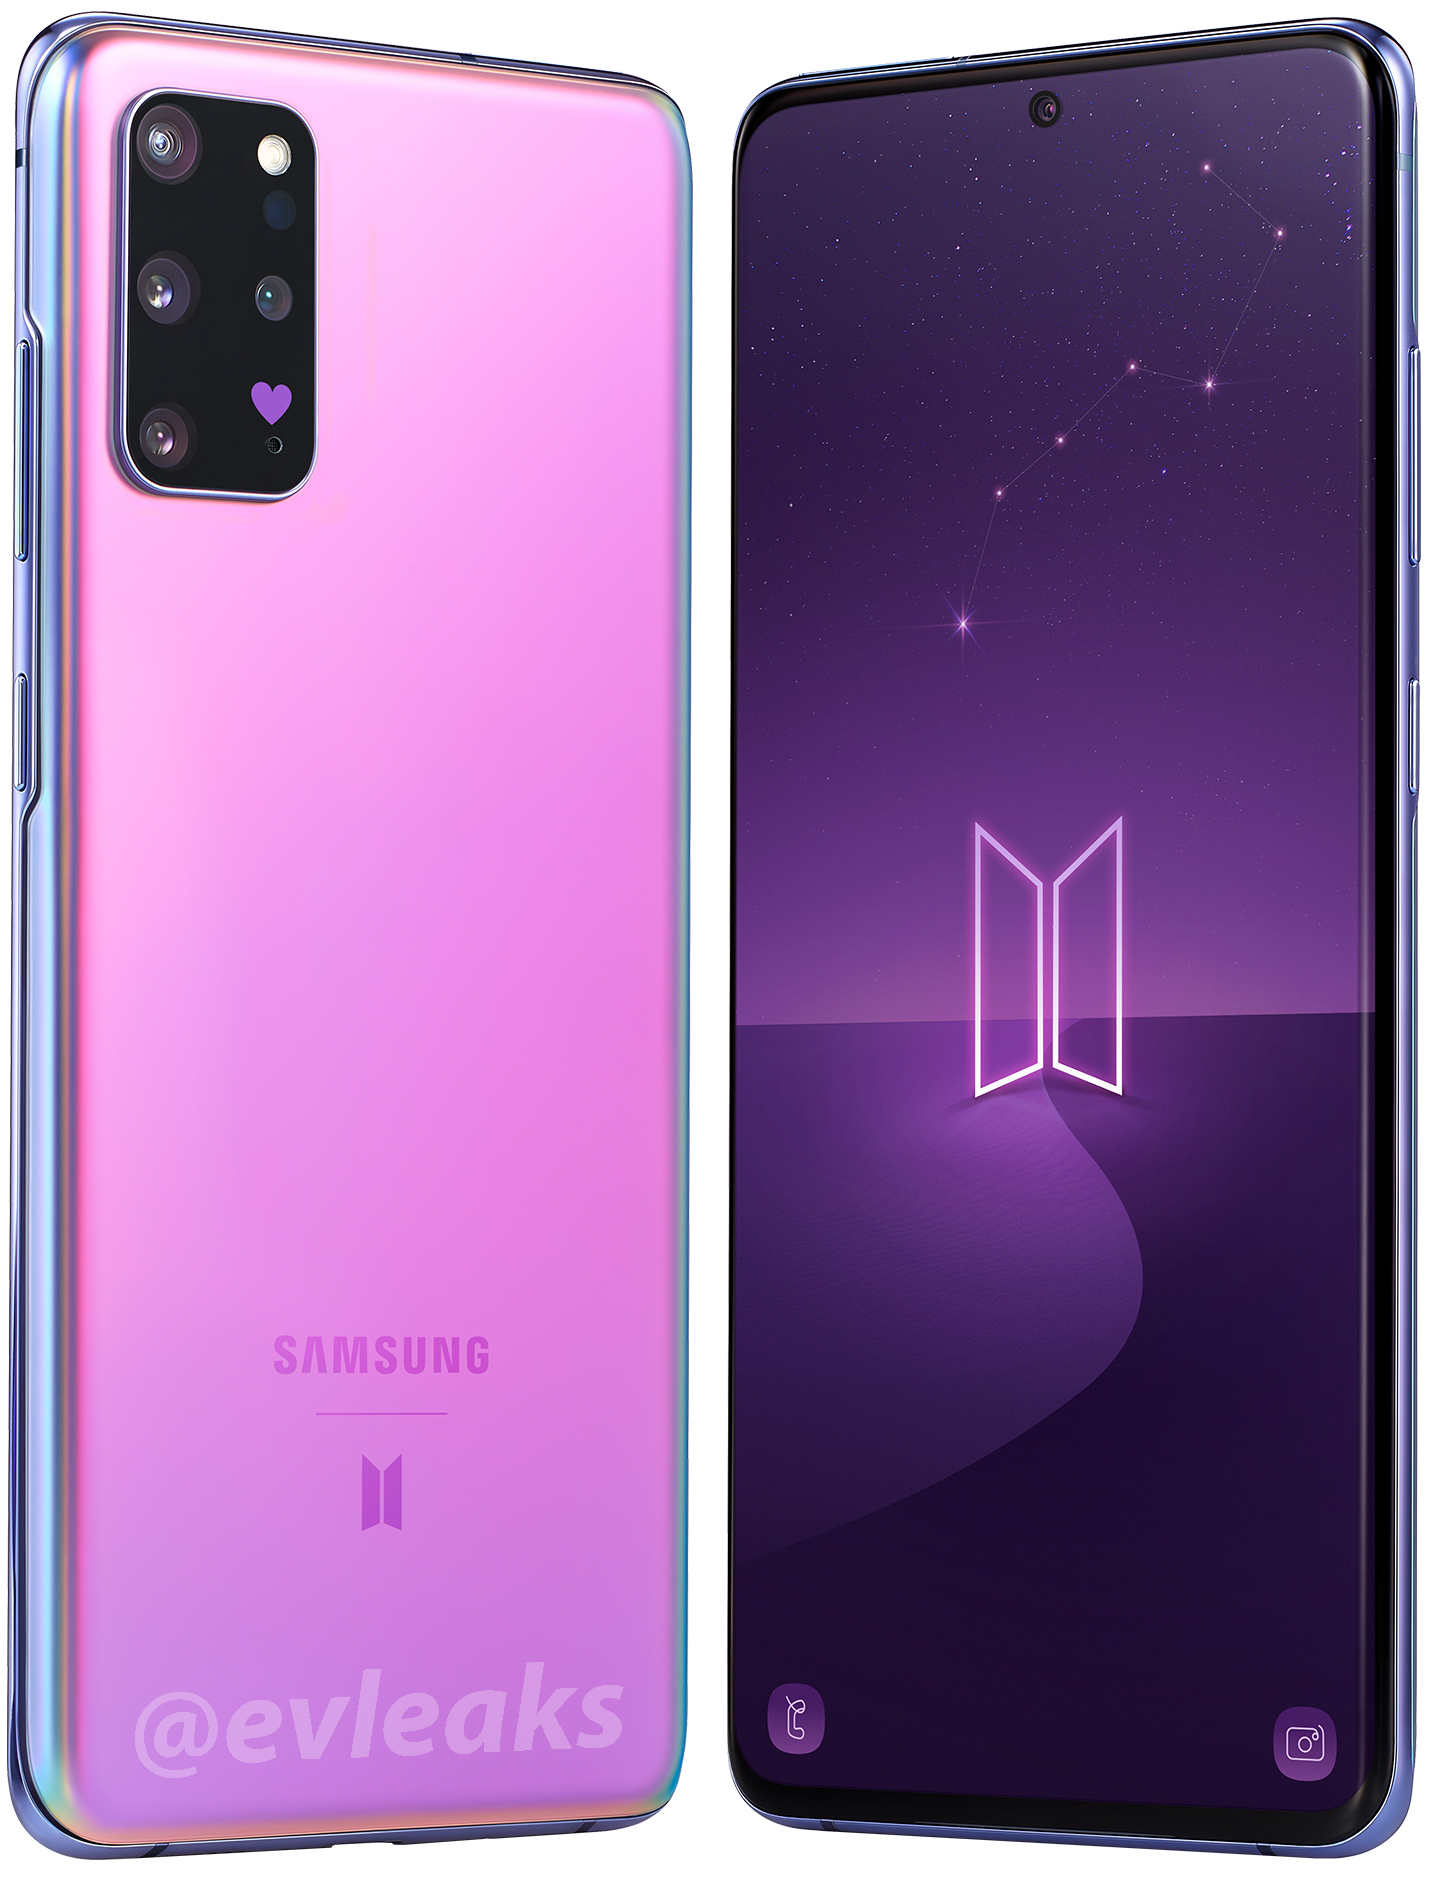 The BTS Edition of the Samsung Galaxy S20+ is coming to